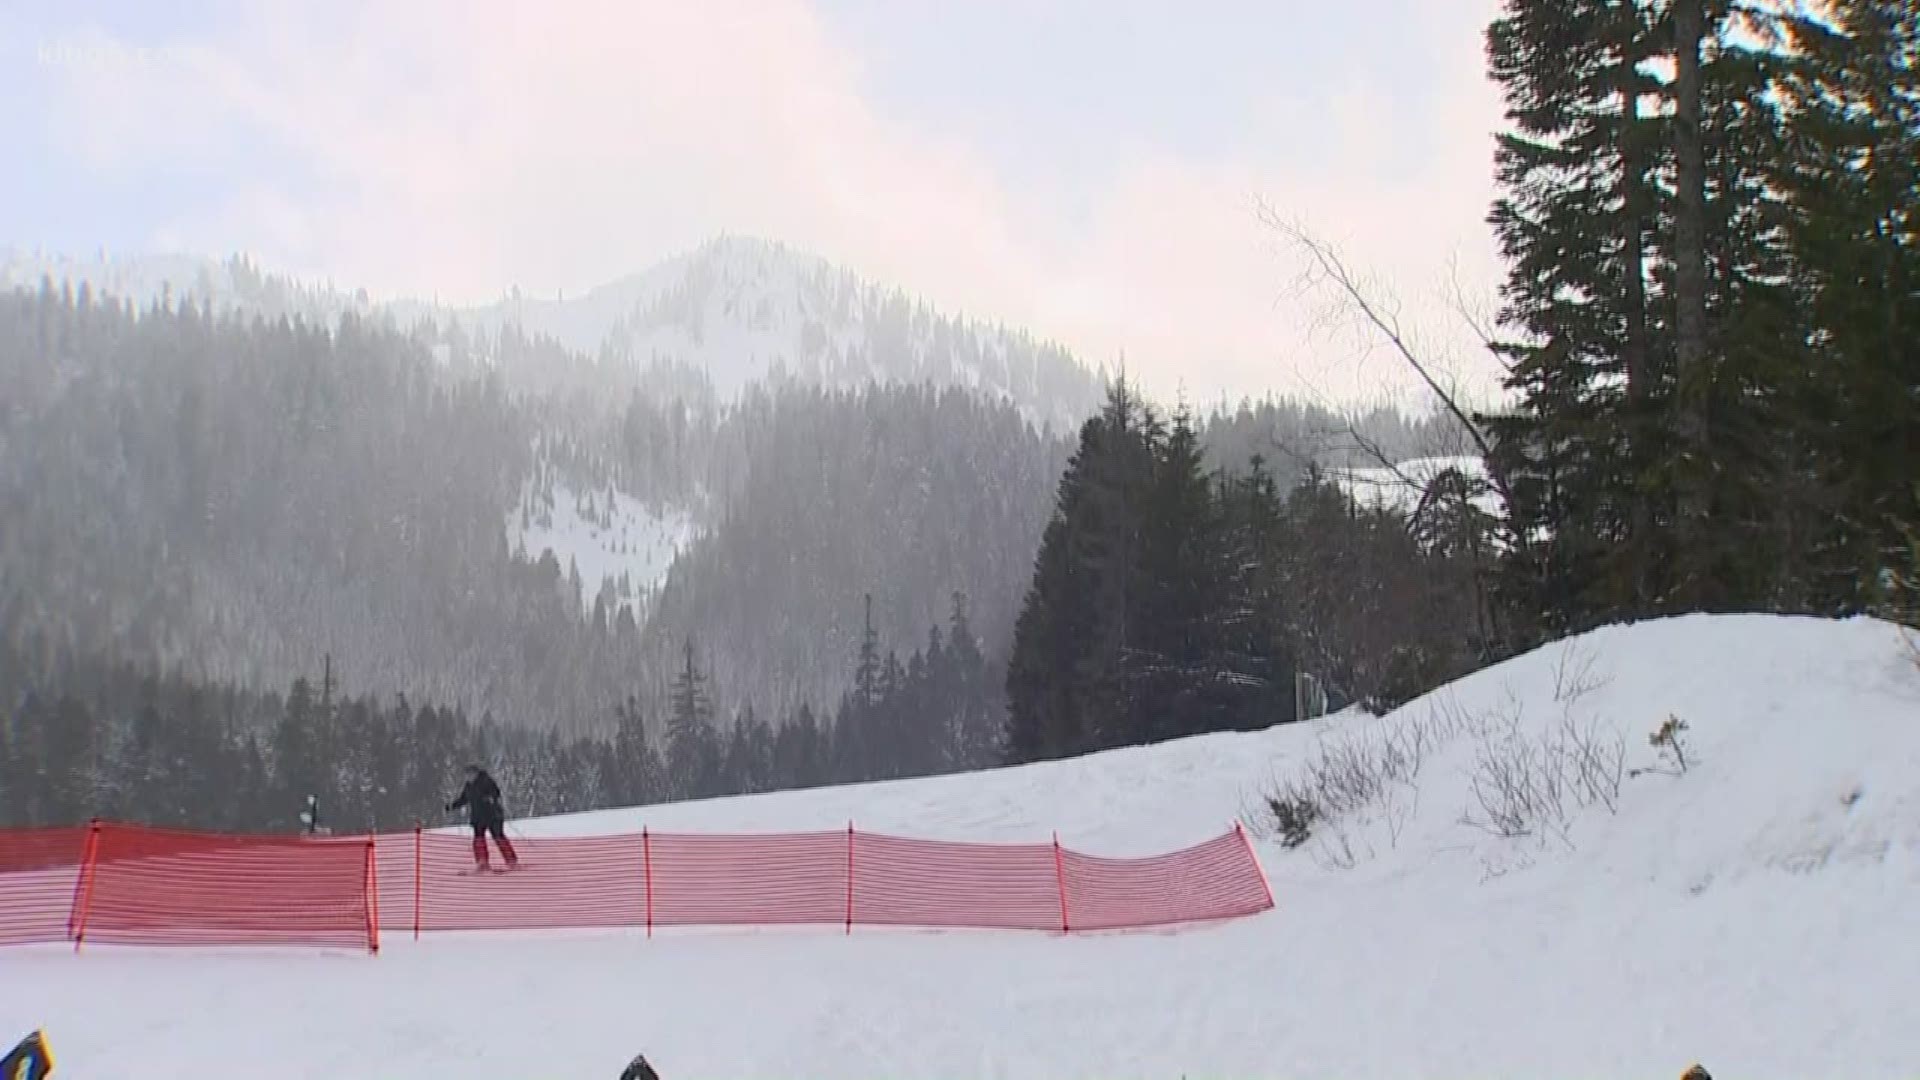 It's been a tough season for skiers at Crystal Mountain Resort, The season started late and never quite took off before mud slides shut it down five days straight.